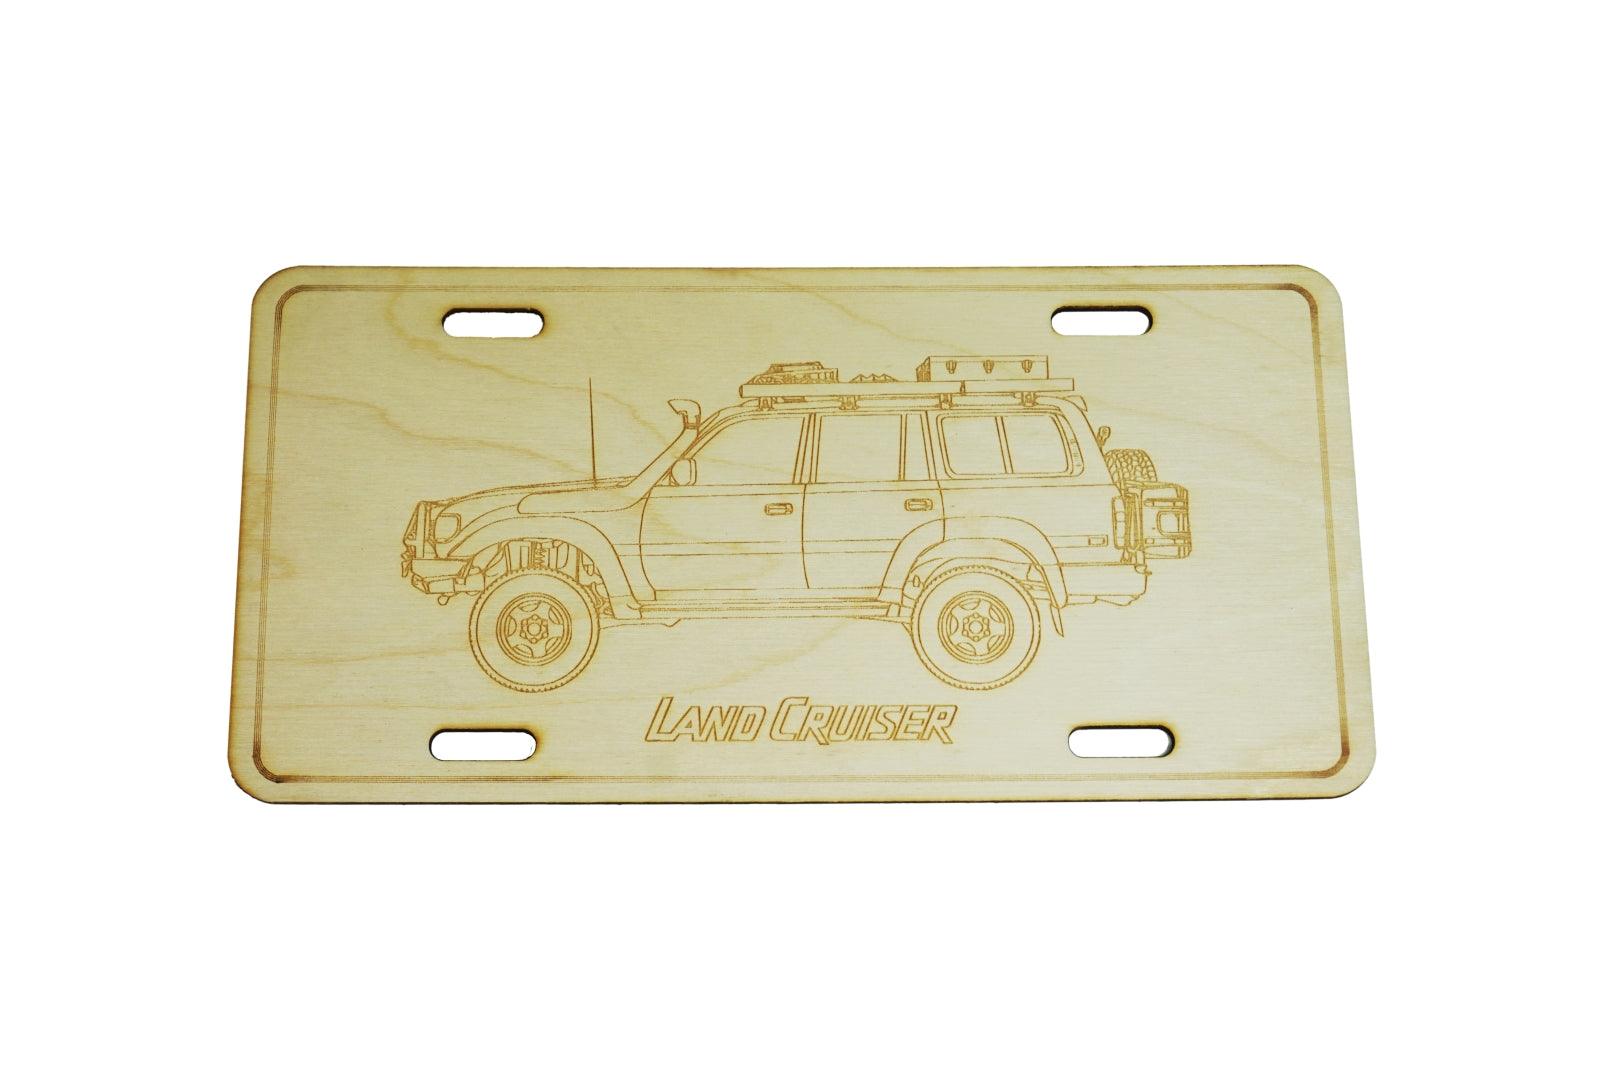 ZSPEC Toyota Landcruiser 4x4 SUV License Plate, Birch, Ornamental  1/8' Birch Plywood construction.  Approximately the same size as a traditional license plate ZSPEC Design LLC Toyota Landcruiser